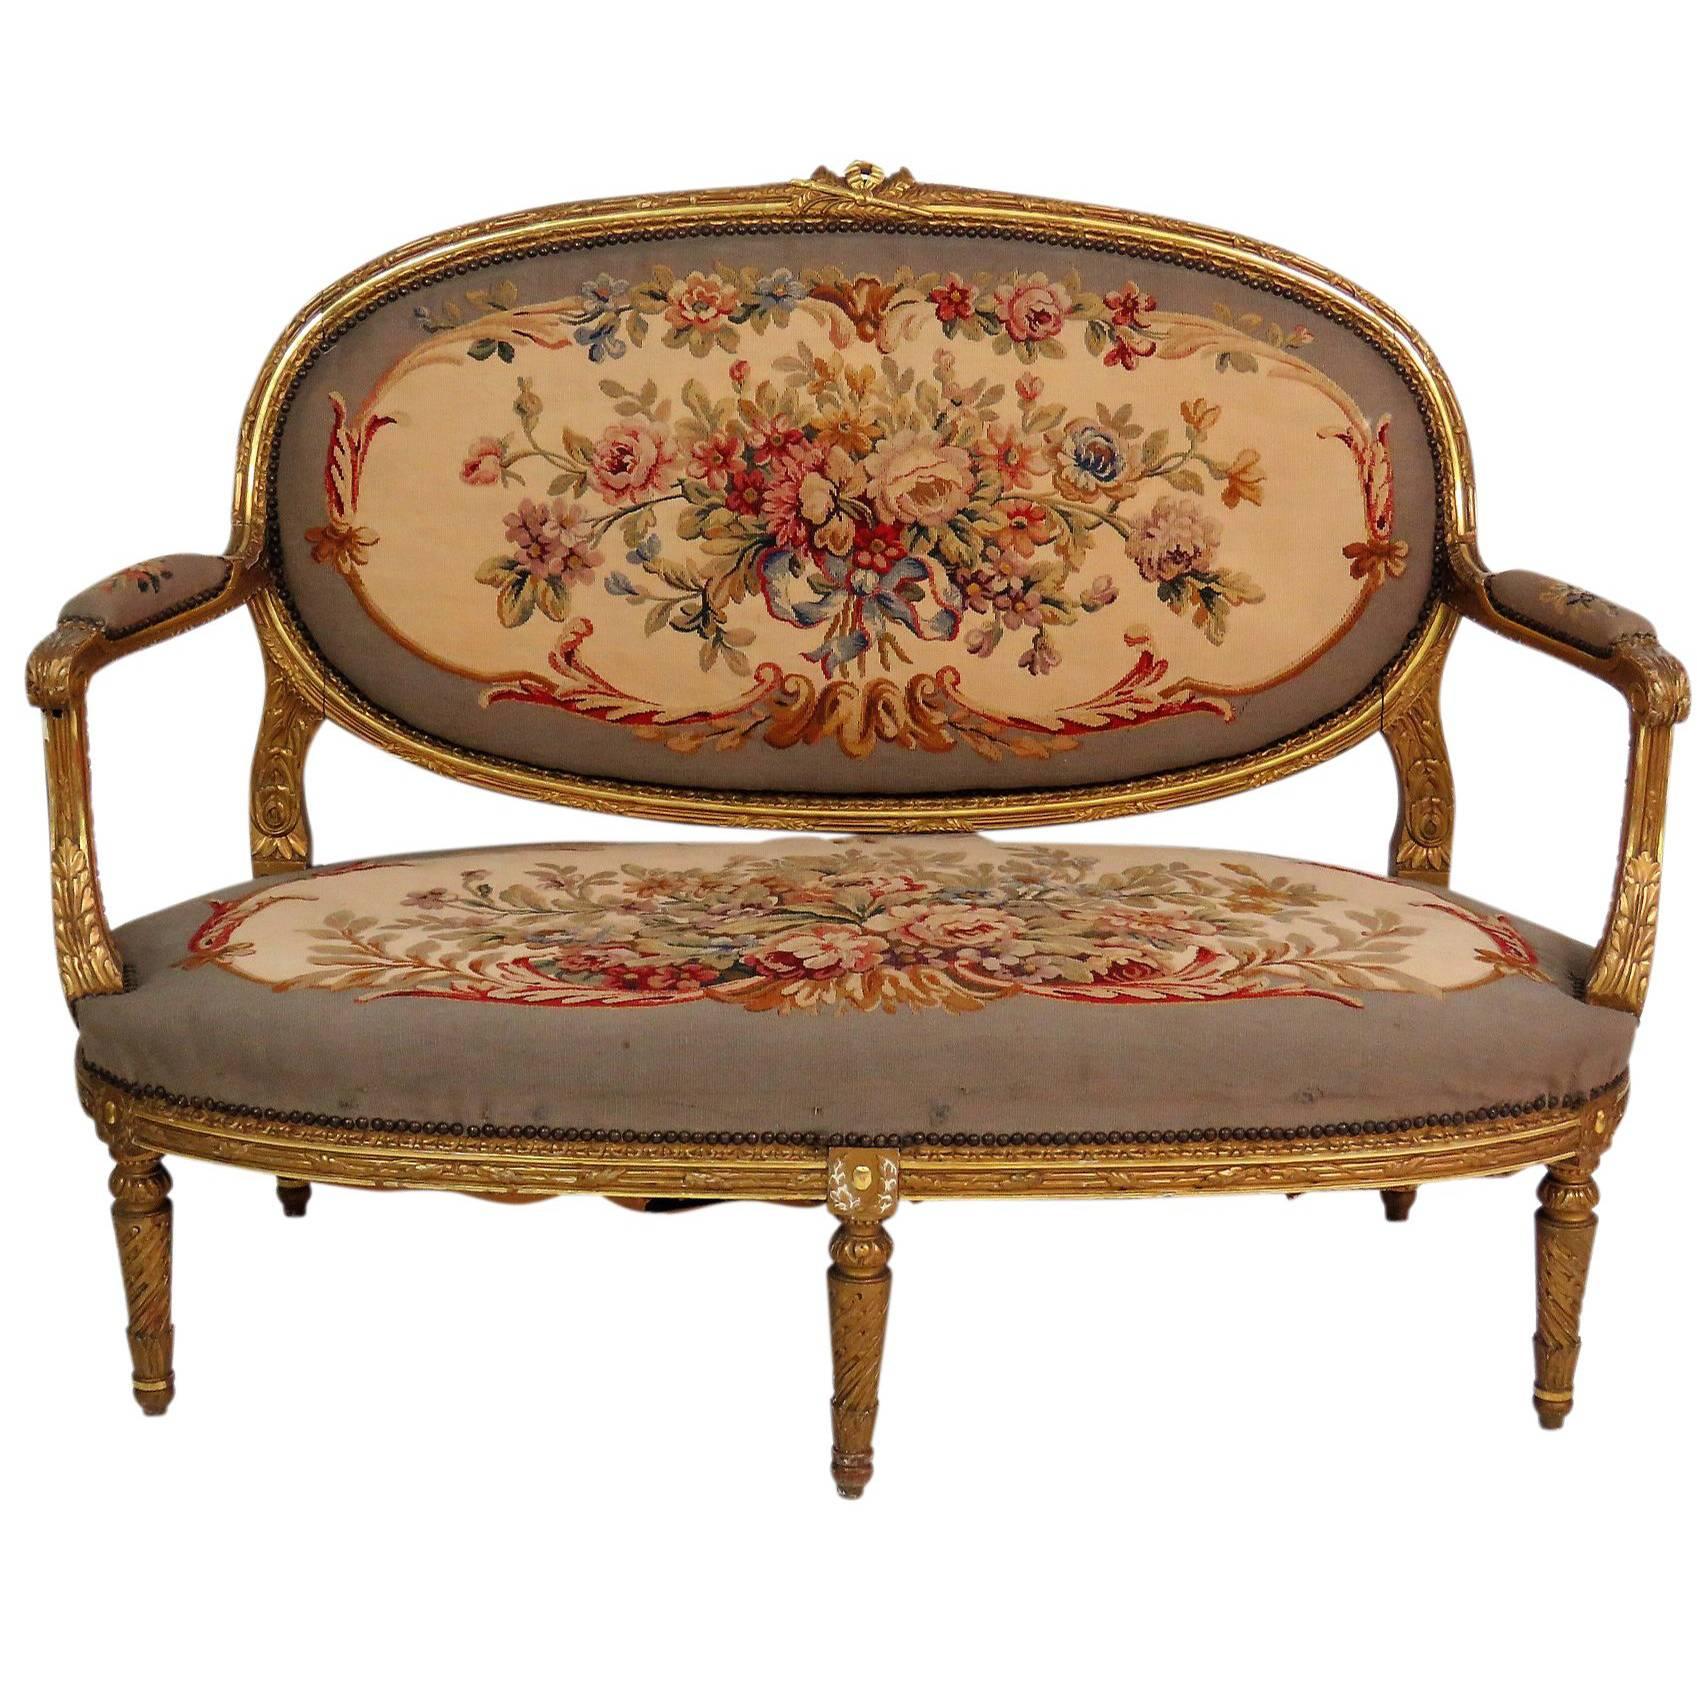 Antique French Louis XVI Style Gilt Carved Aubusson Upholstered Sofa Settee